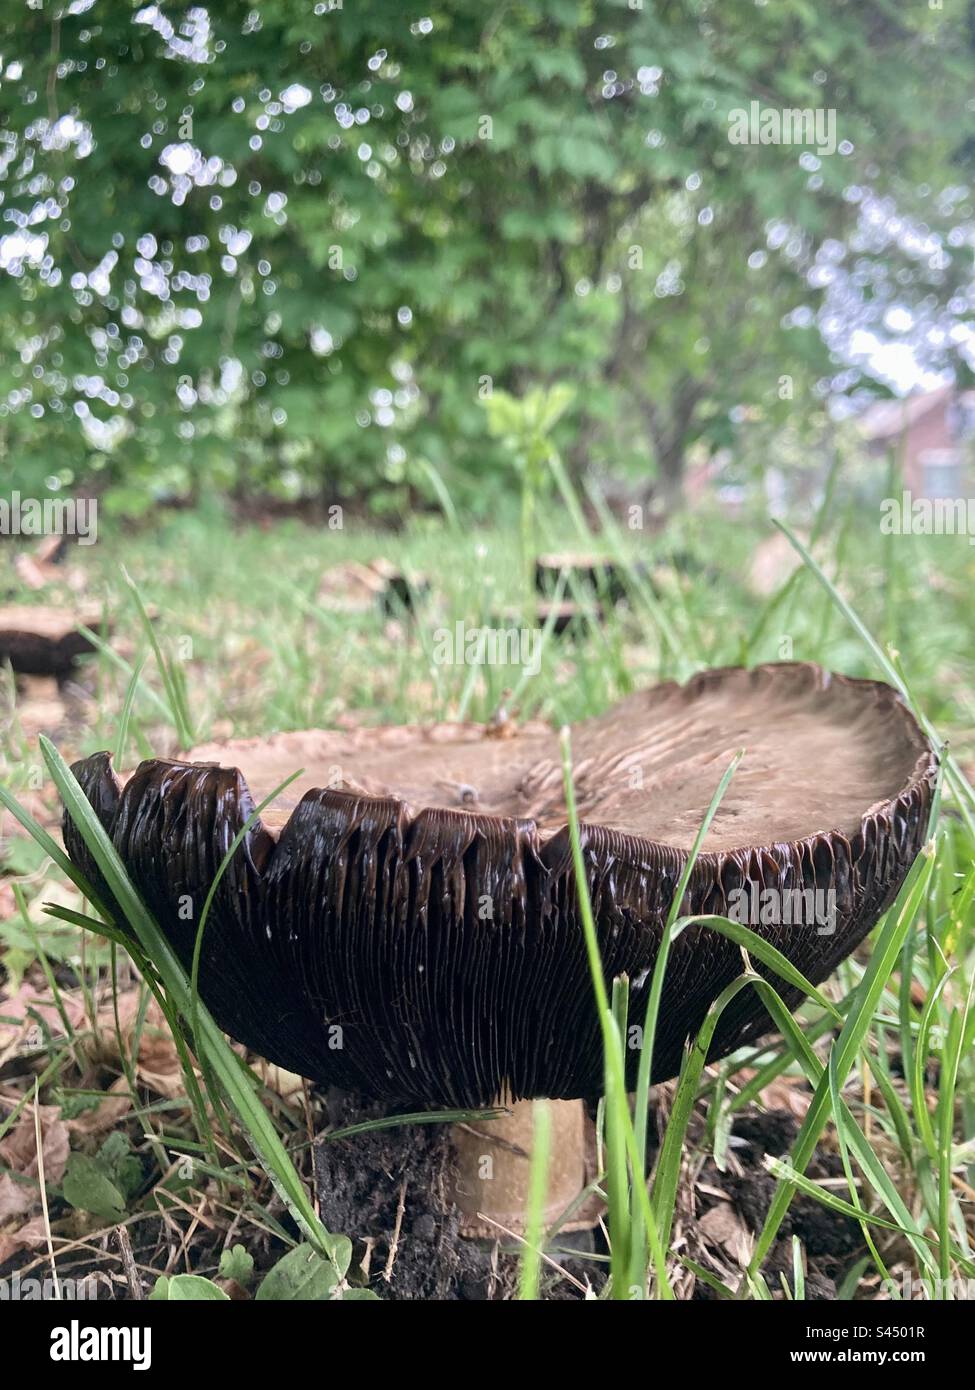 Stropharia rugosoannulata, commonly known as the garden giant mushroom. Stock Photo